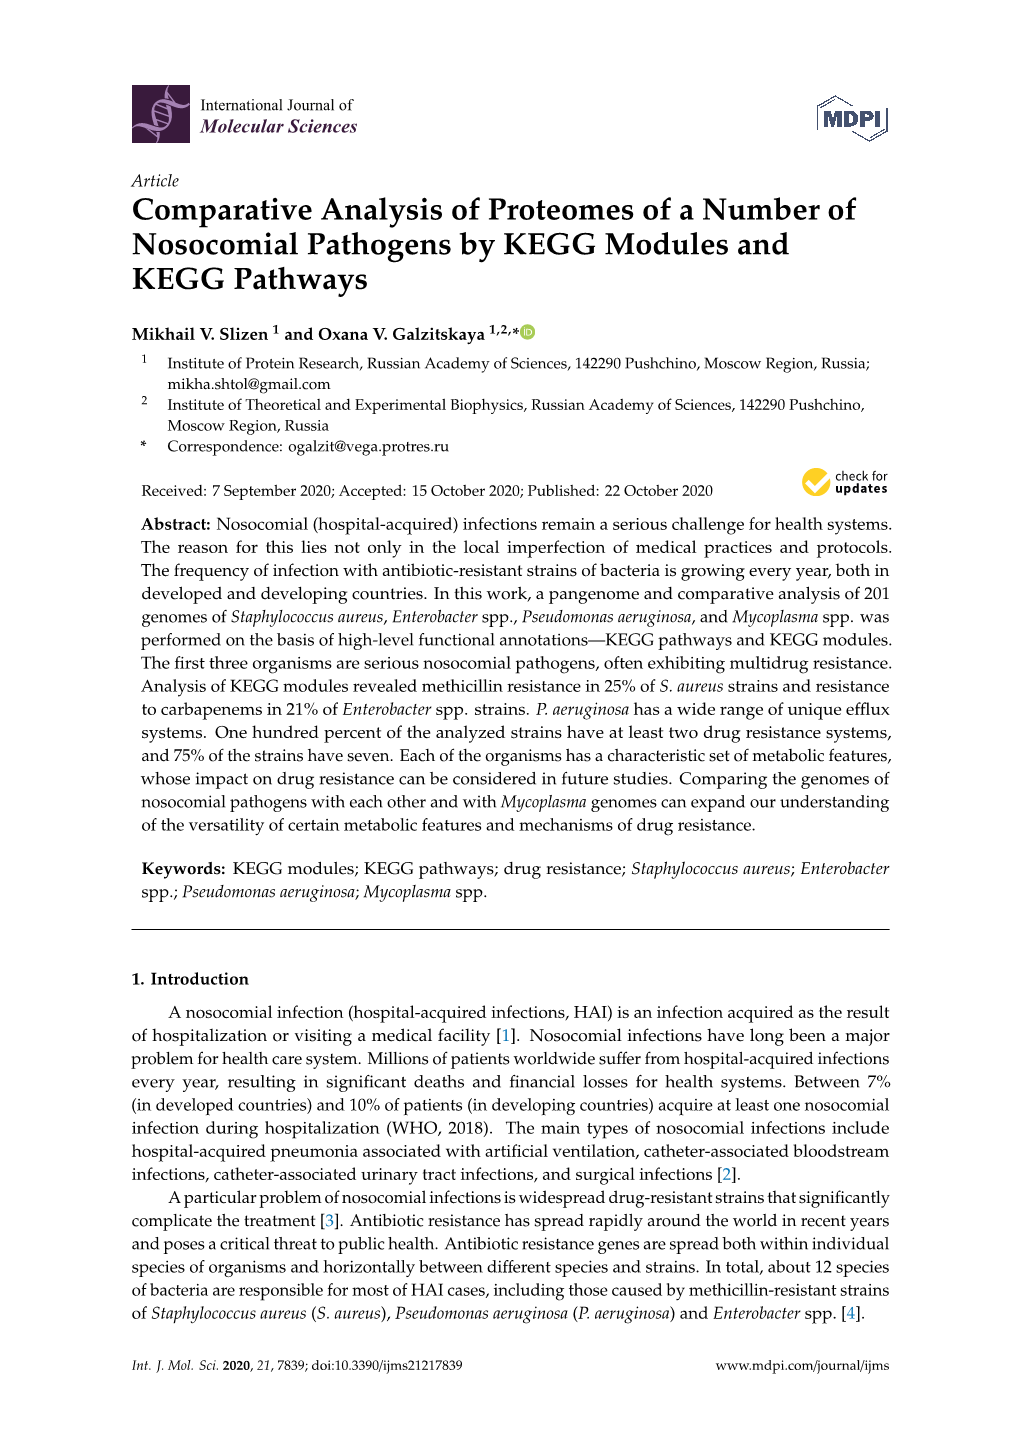 Comparative Analysis of Proteomes of a Number of Nosocomial Pathogens by KEGG Modules and KEGG Pathways